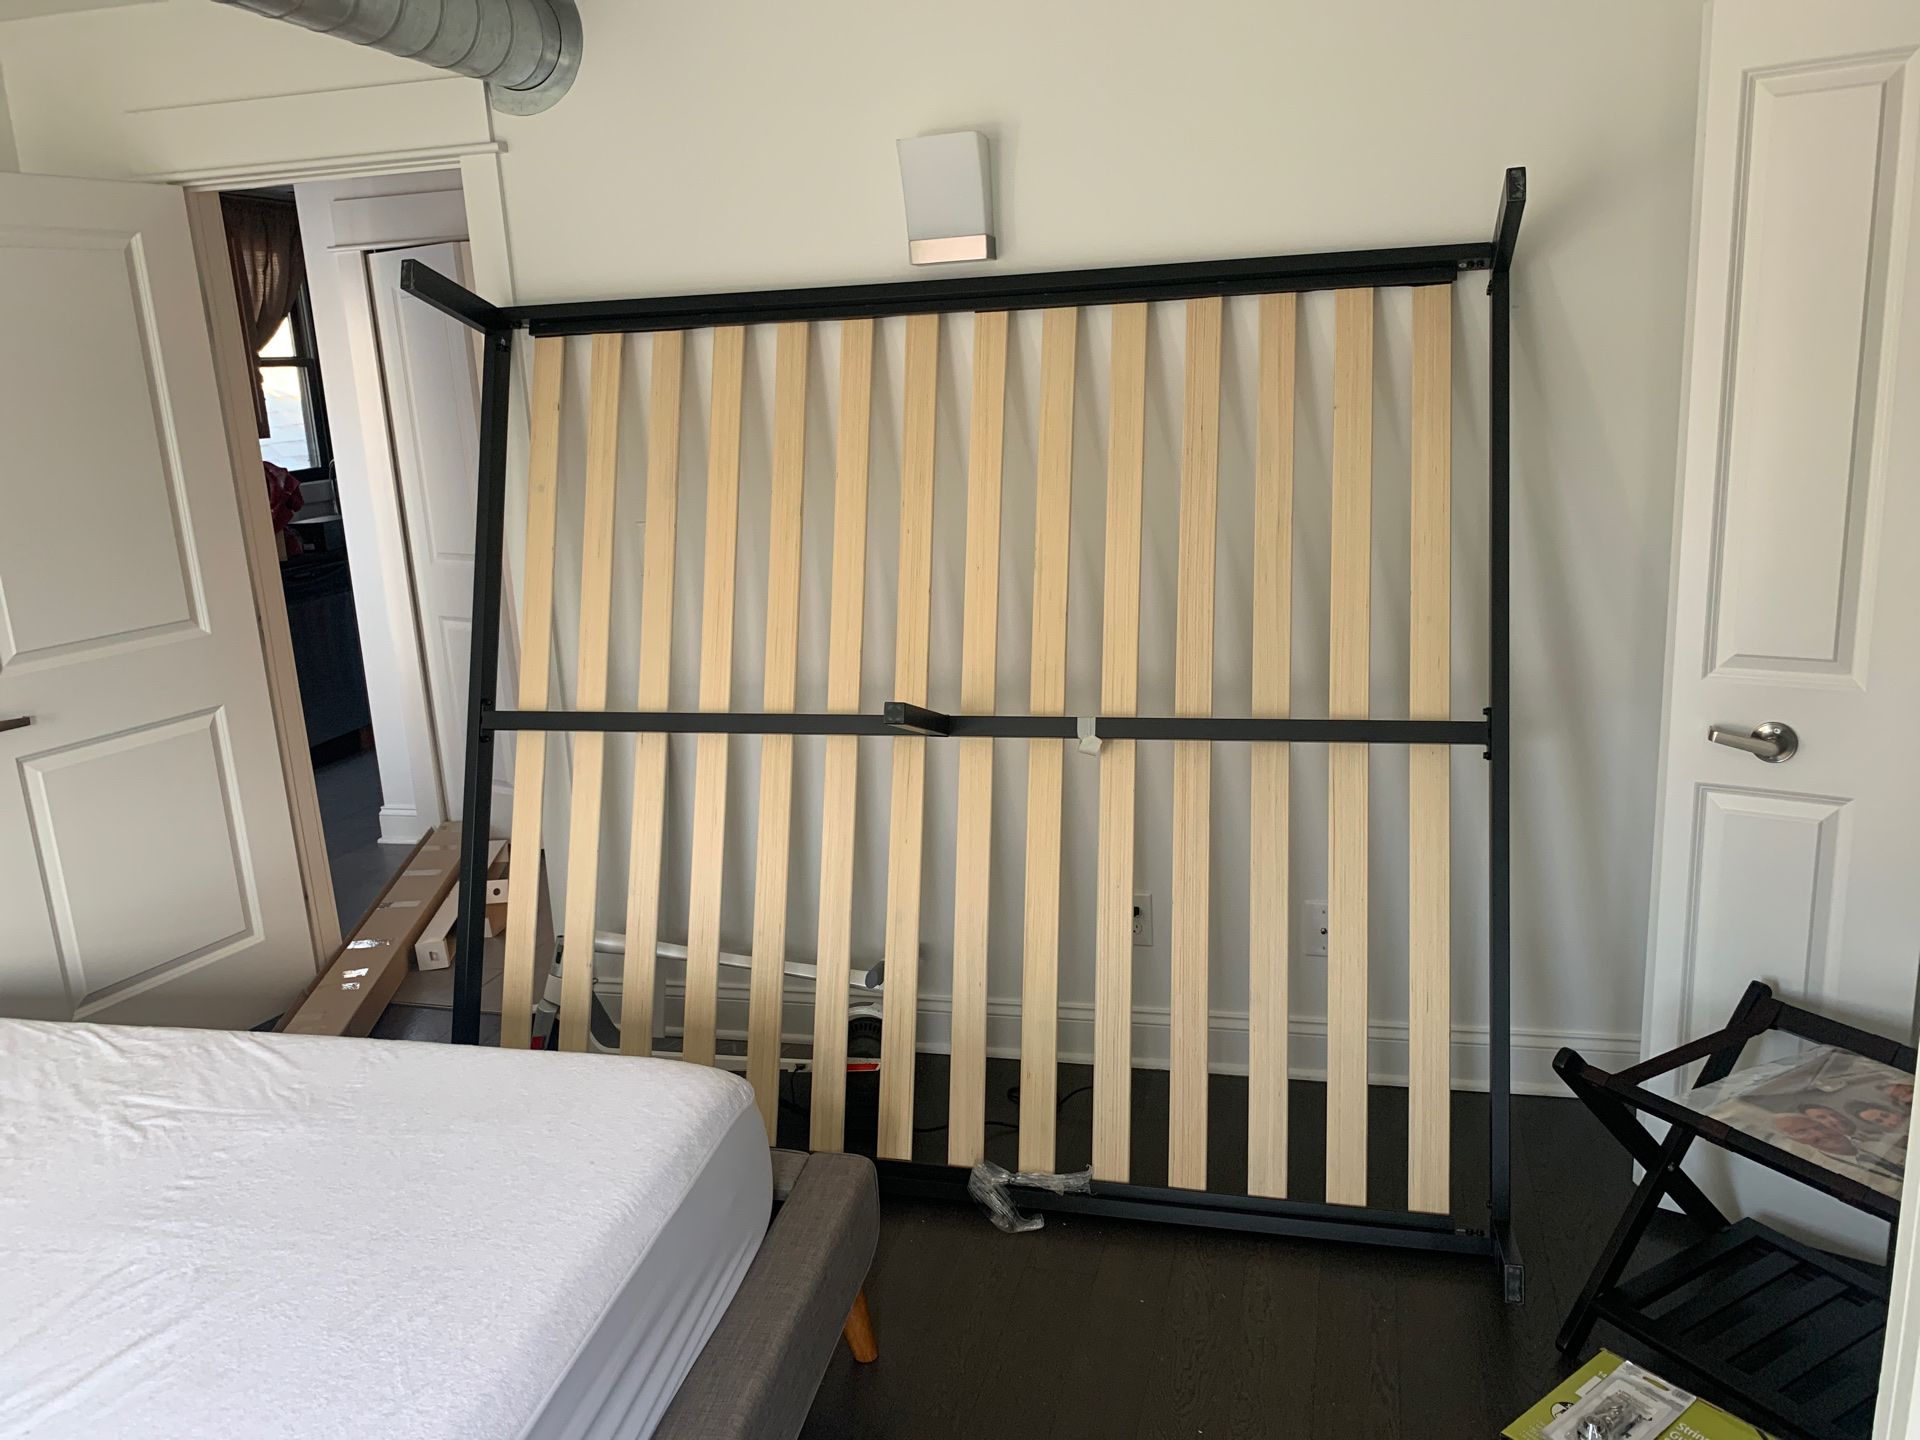 Queen size bed frame / support